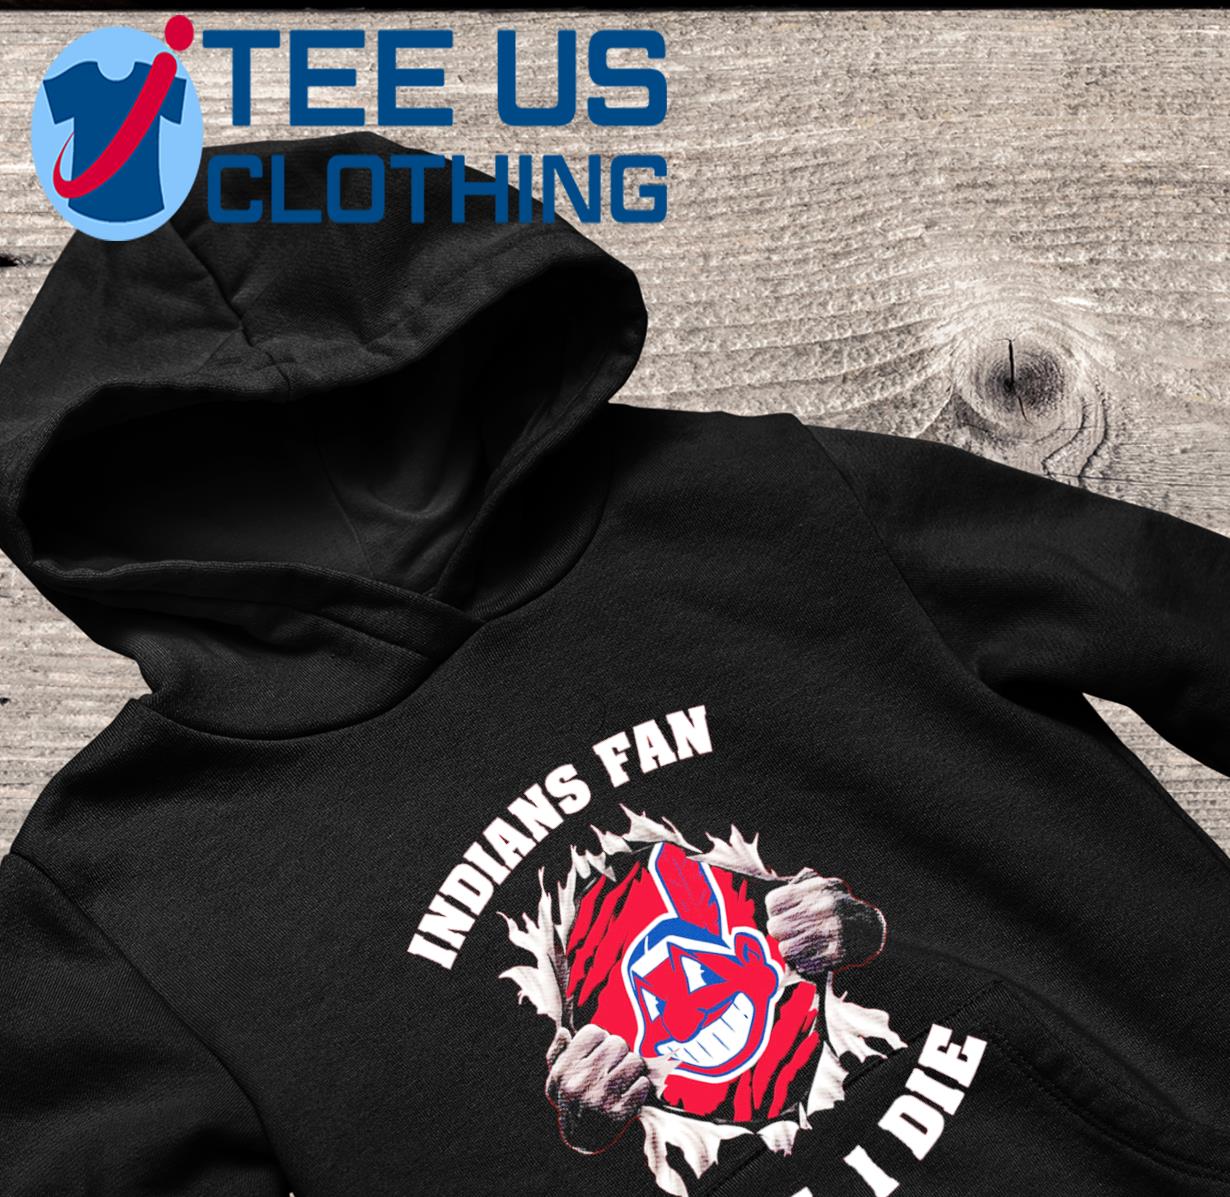 Indians fan till I die Cleveland Indians shirt, hoodie, sweater, long sleeve  and tank top